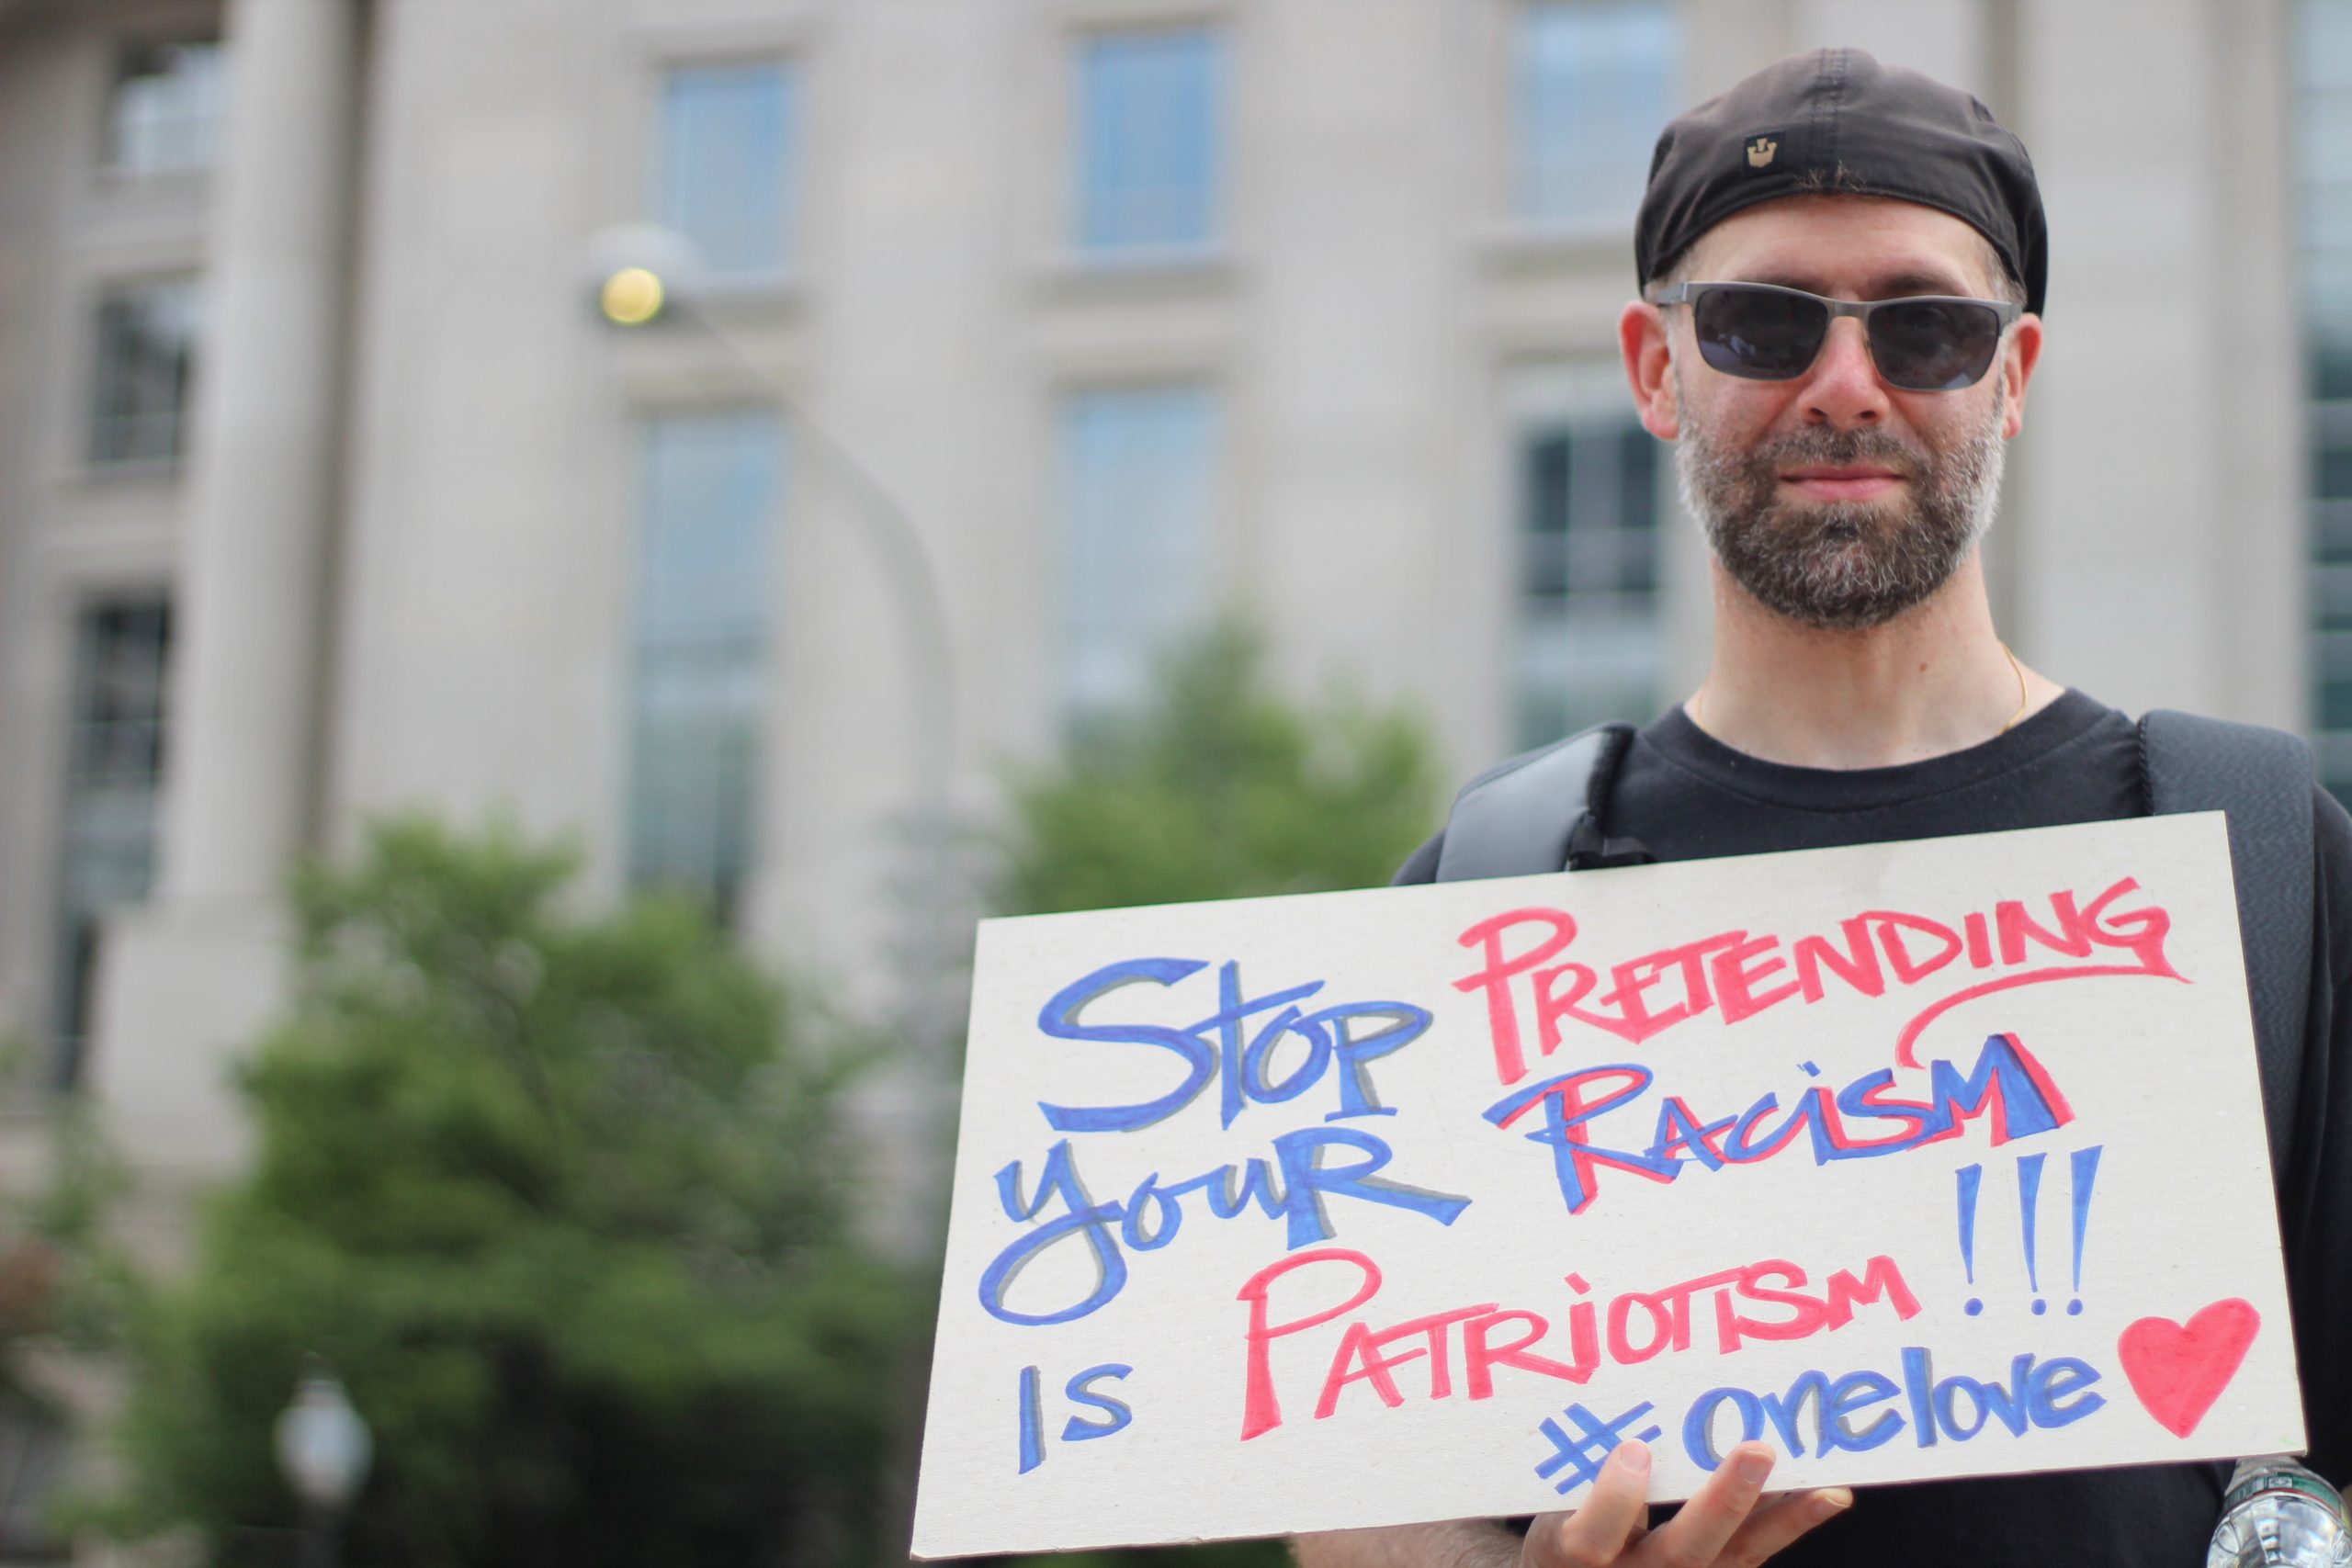 In an article about the Alt-Right Pipeline, an image of a man holding a sign protesting racism.